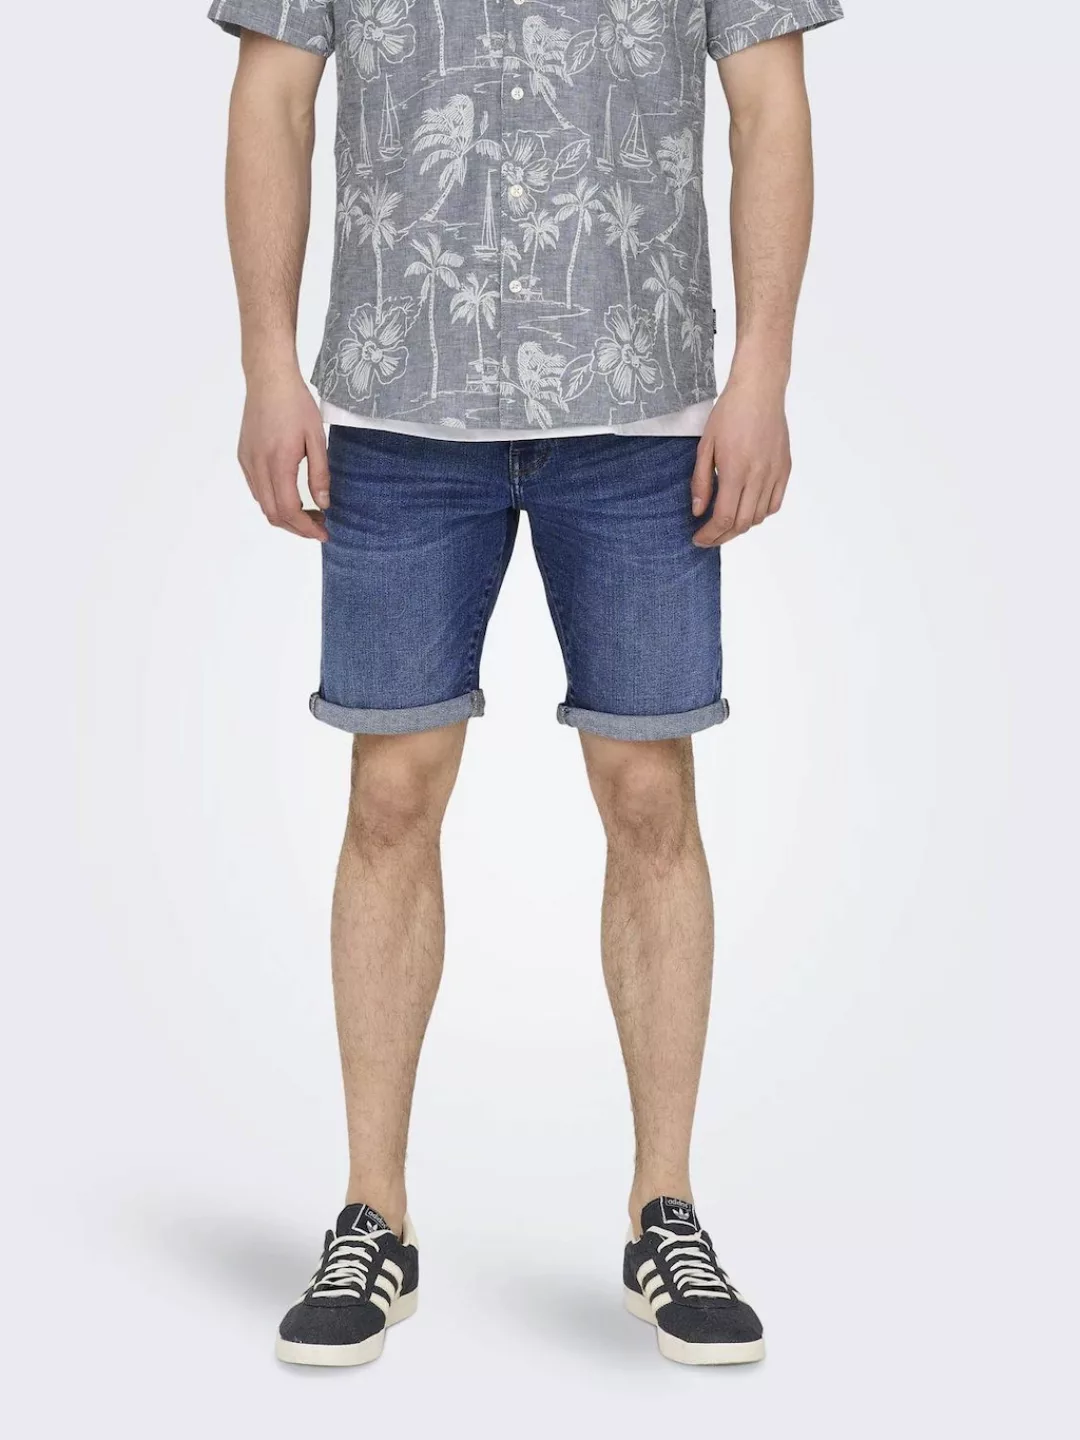 ONLY & SONS Shorts "ONSPLY MBD 8772 TAI DNM SHORTS NOOS" günstig online kaufen